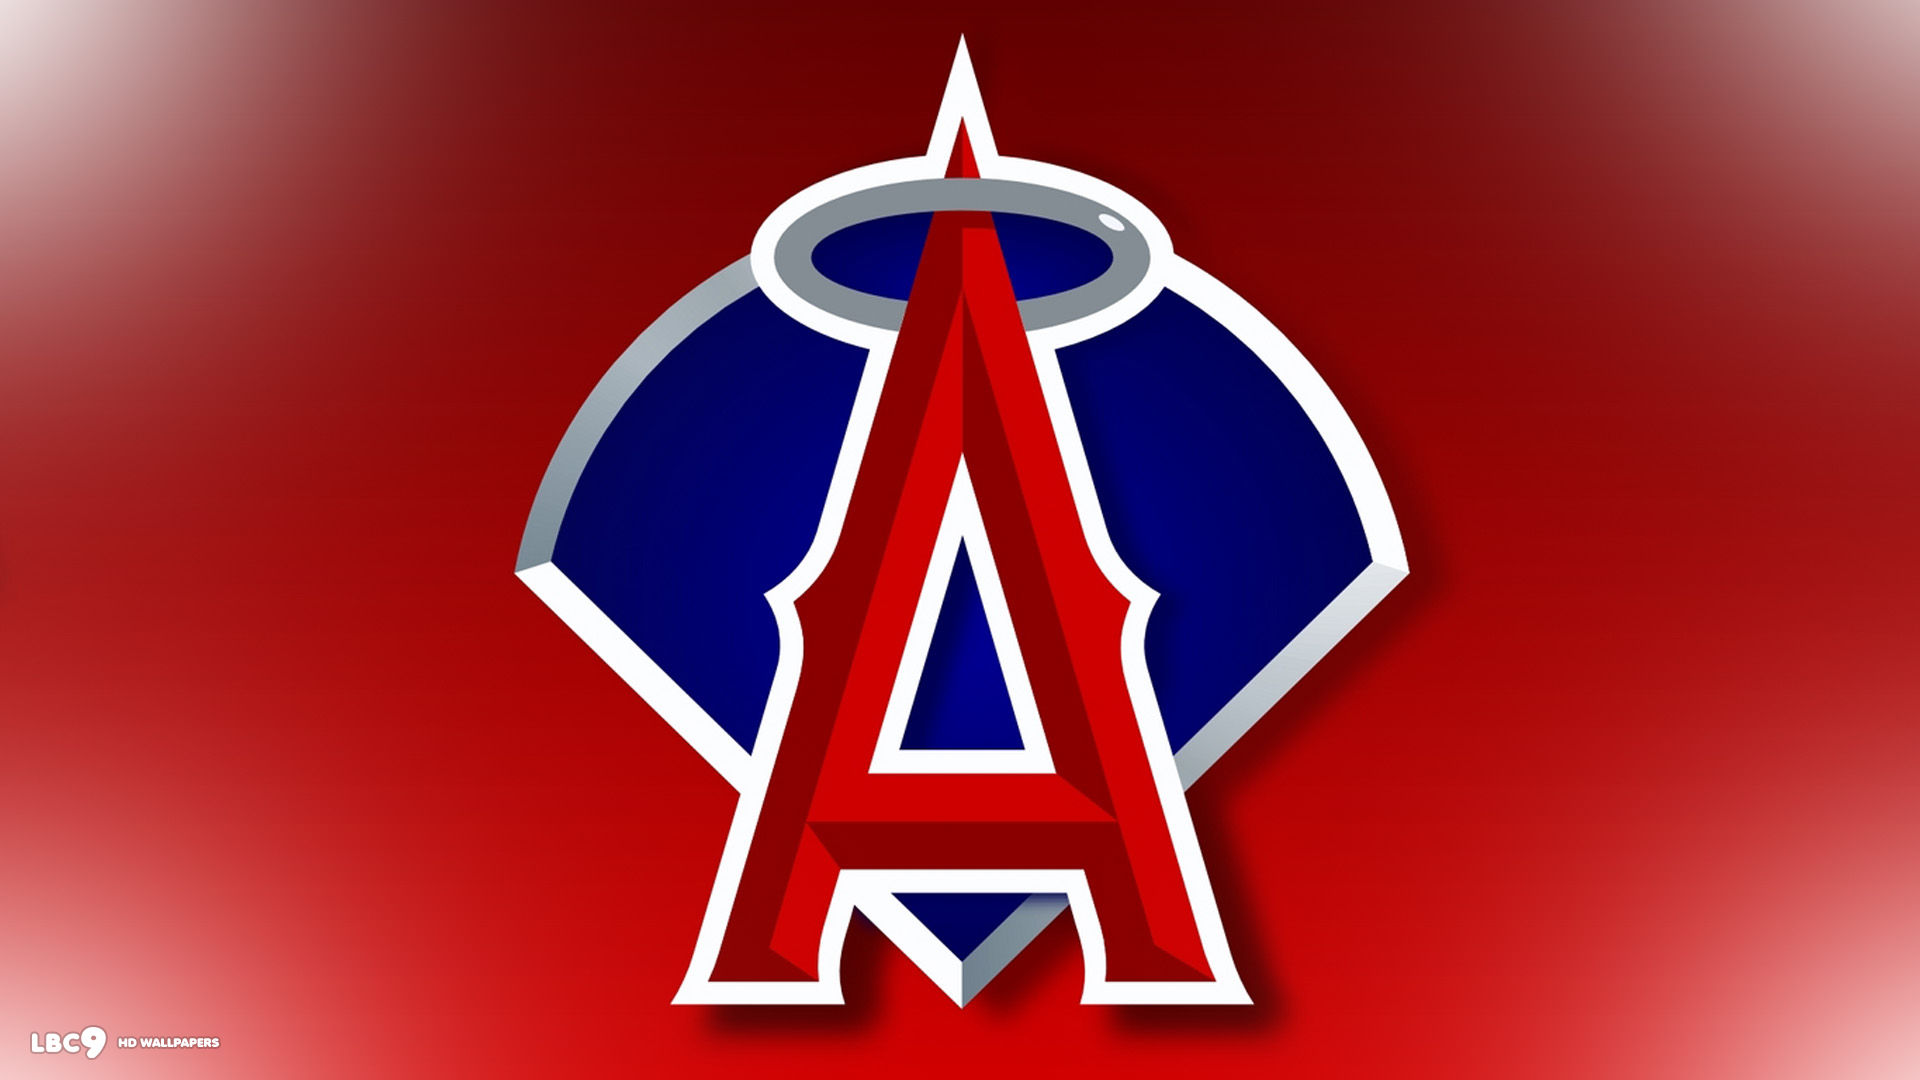 Los angeles angels of anaheim wallpaper 3 / 3 mlb teams hd backgrounds